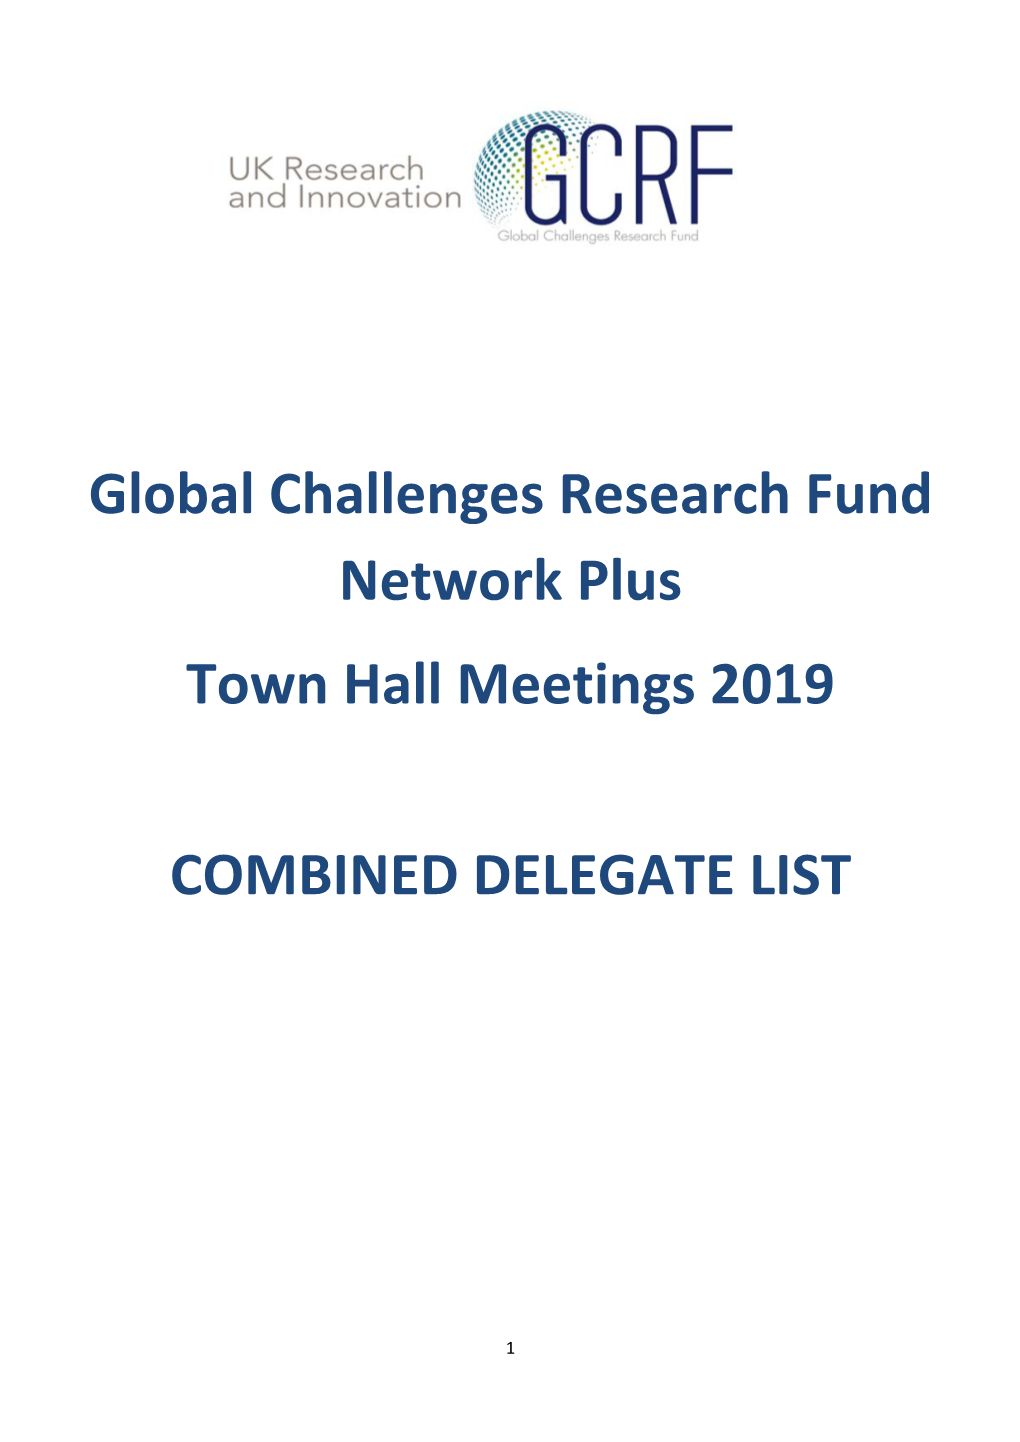 Global Challenges Research Fund Network Plus Town Hall Meetings 2019